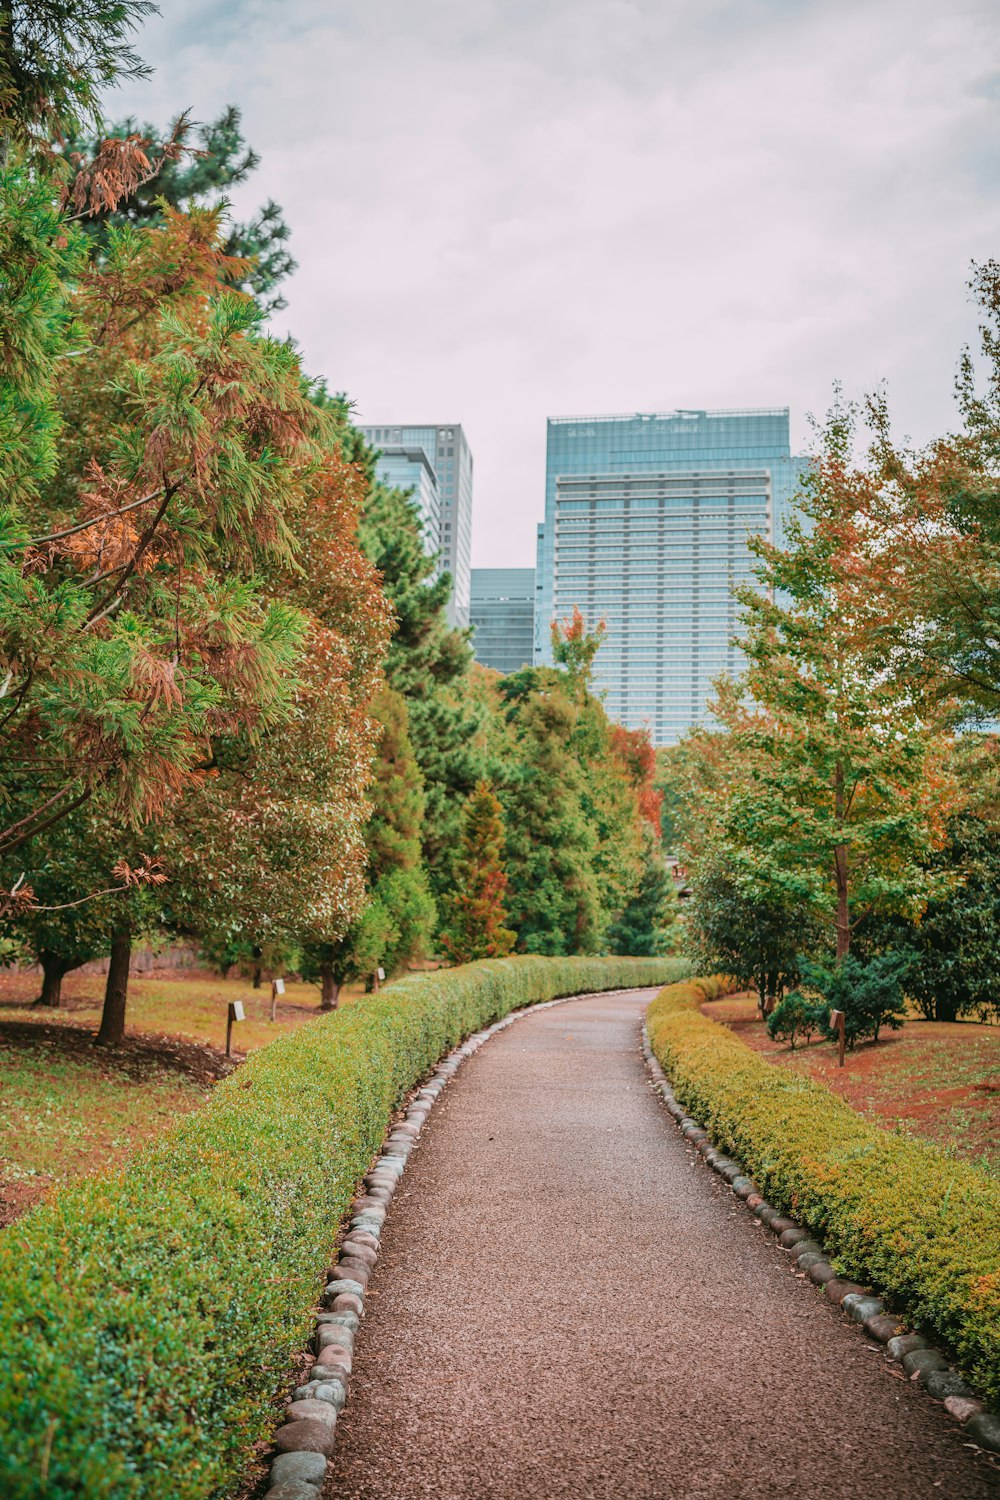 a paved path in a park with tall buildings in the background